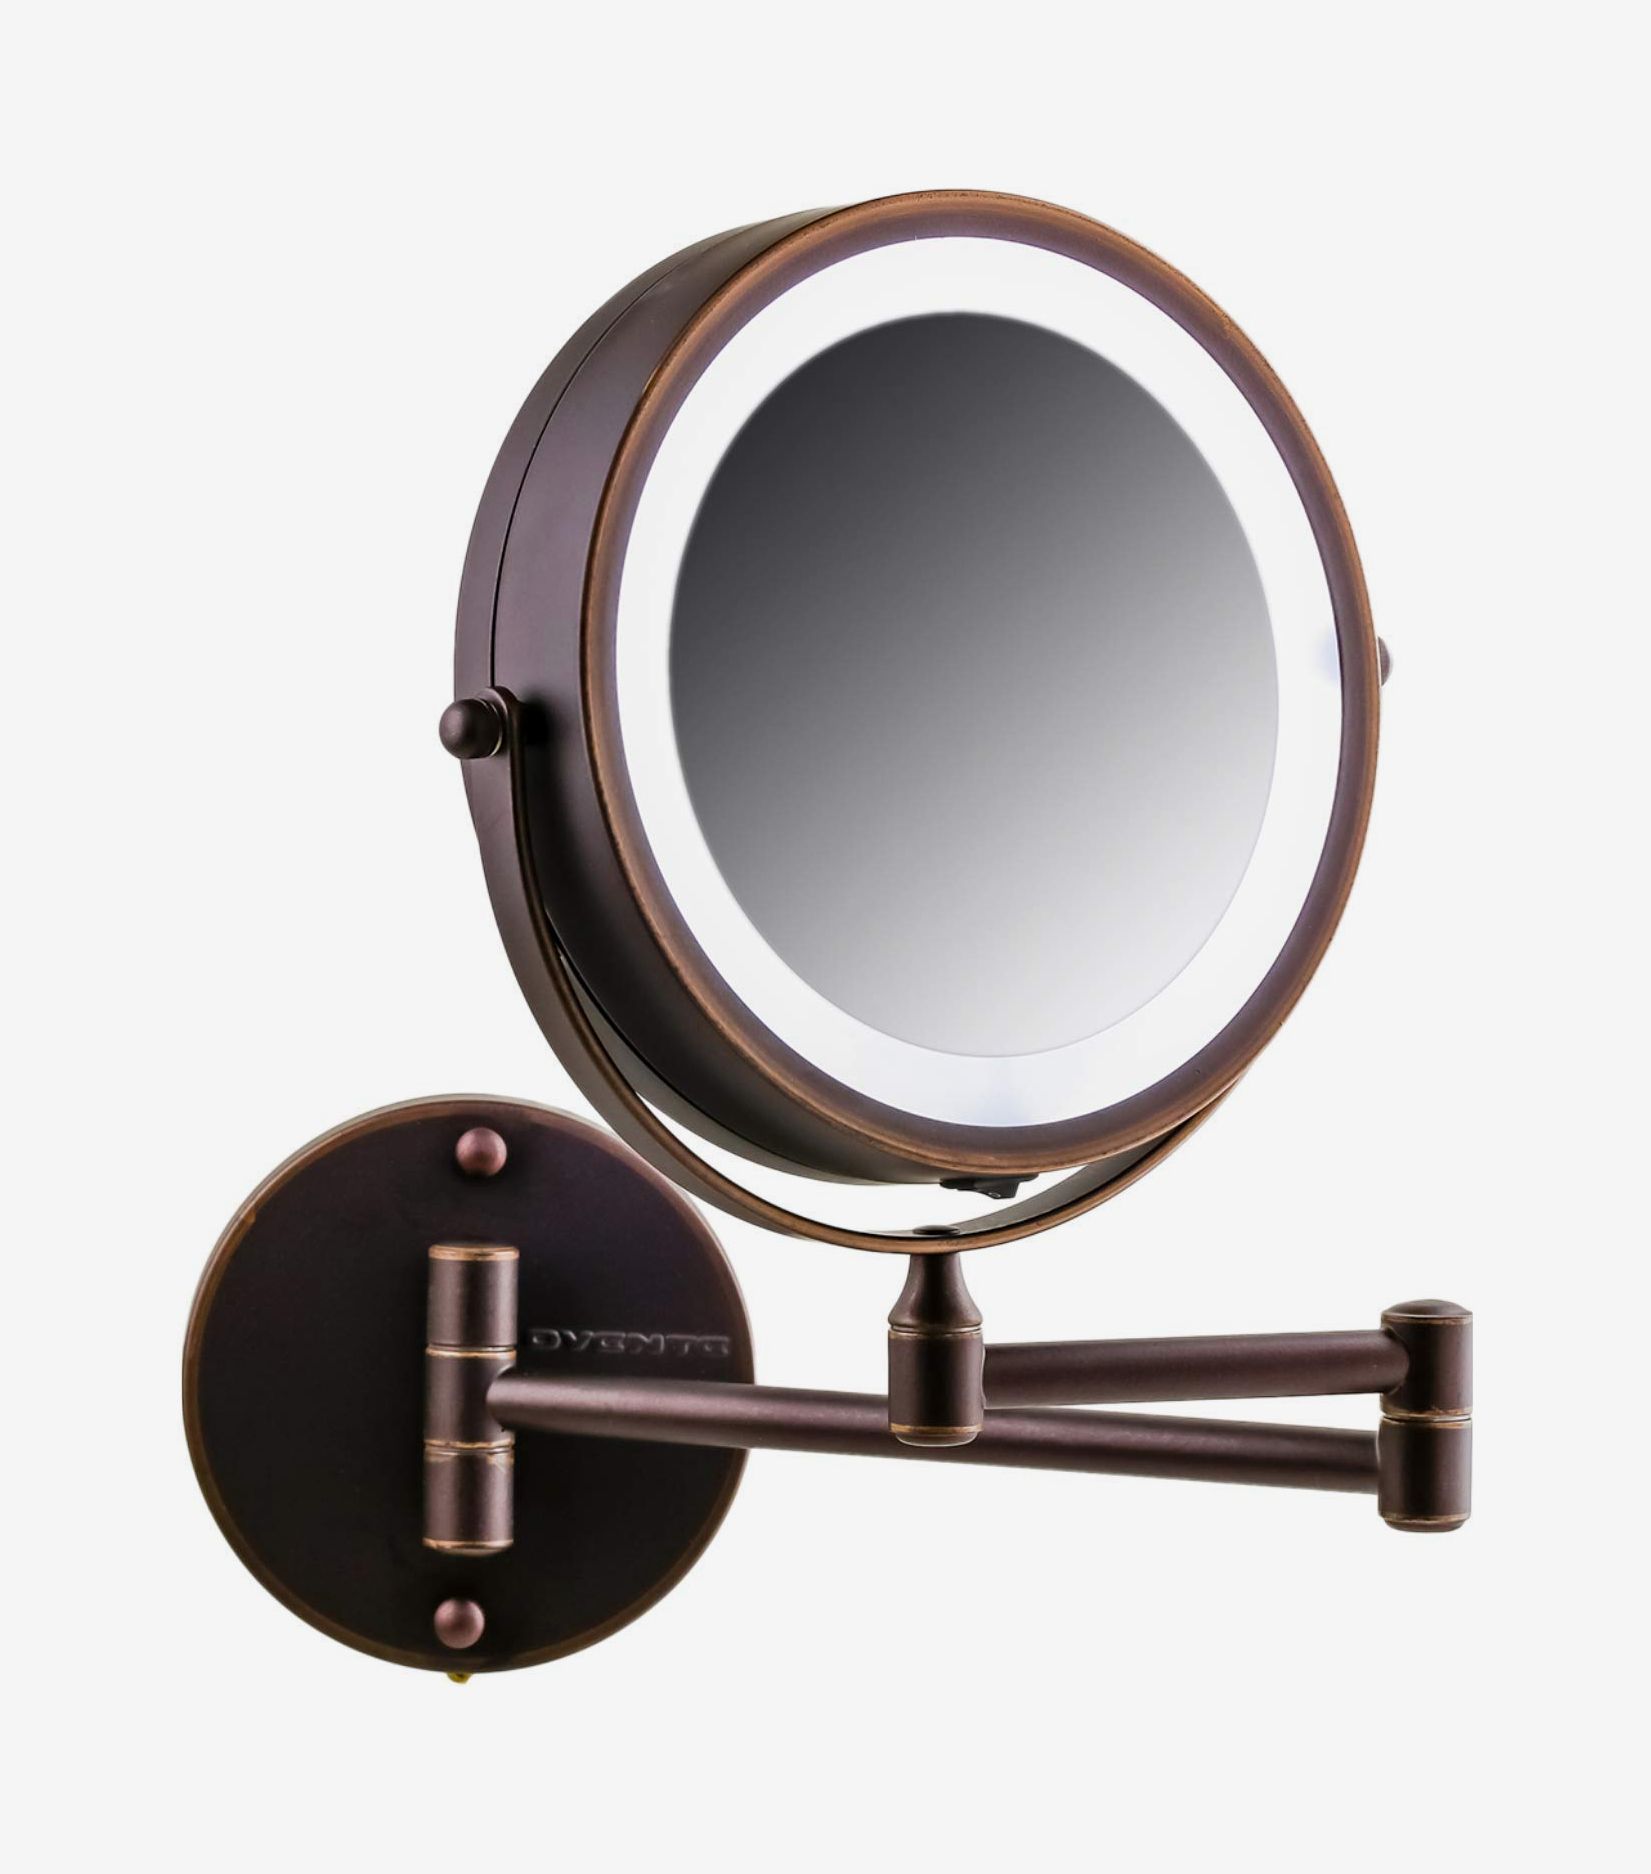 14 Best Lighted Makeup Mirrors 2021, 15x Magnifying Makeup Mirror With Lights